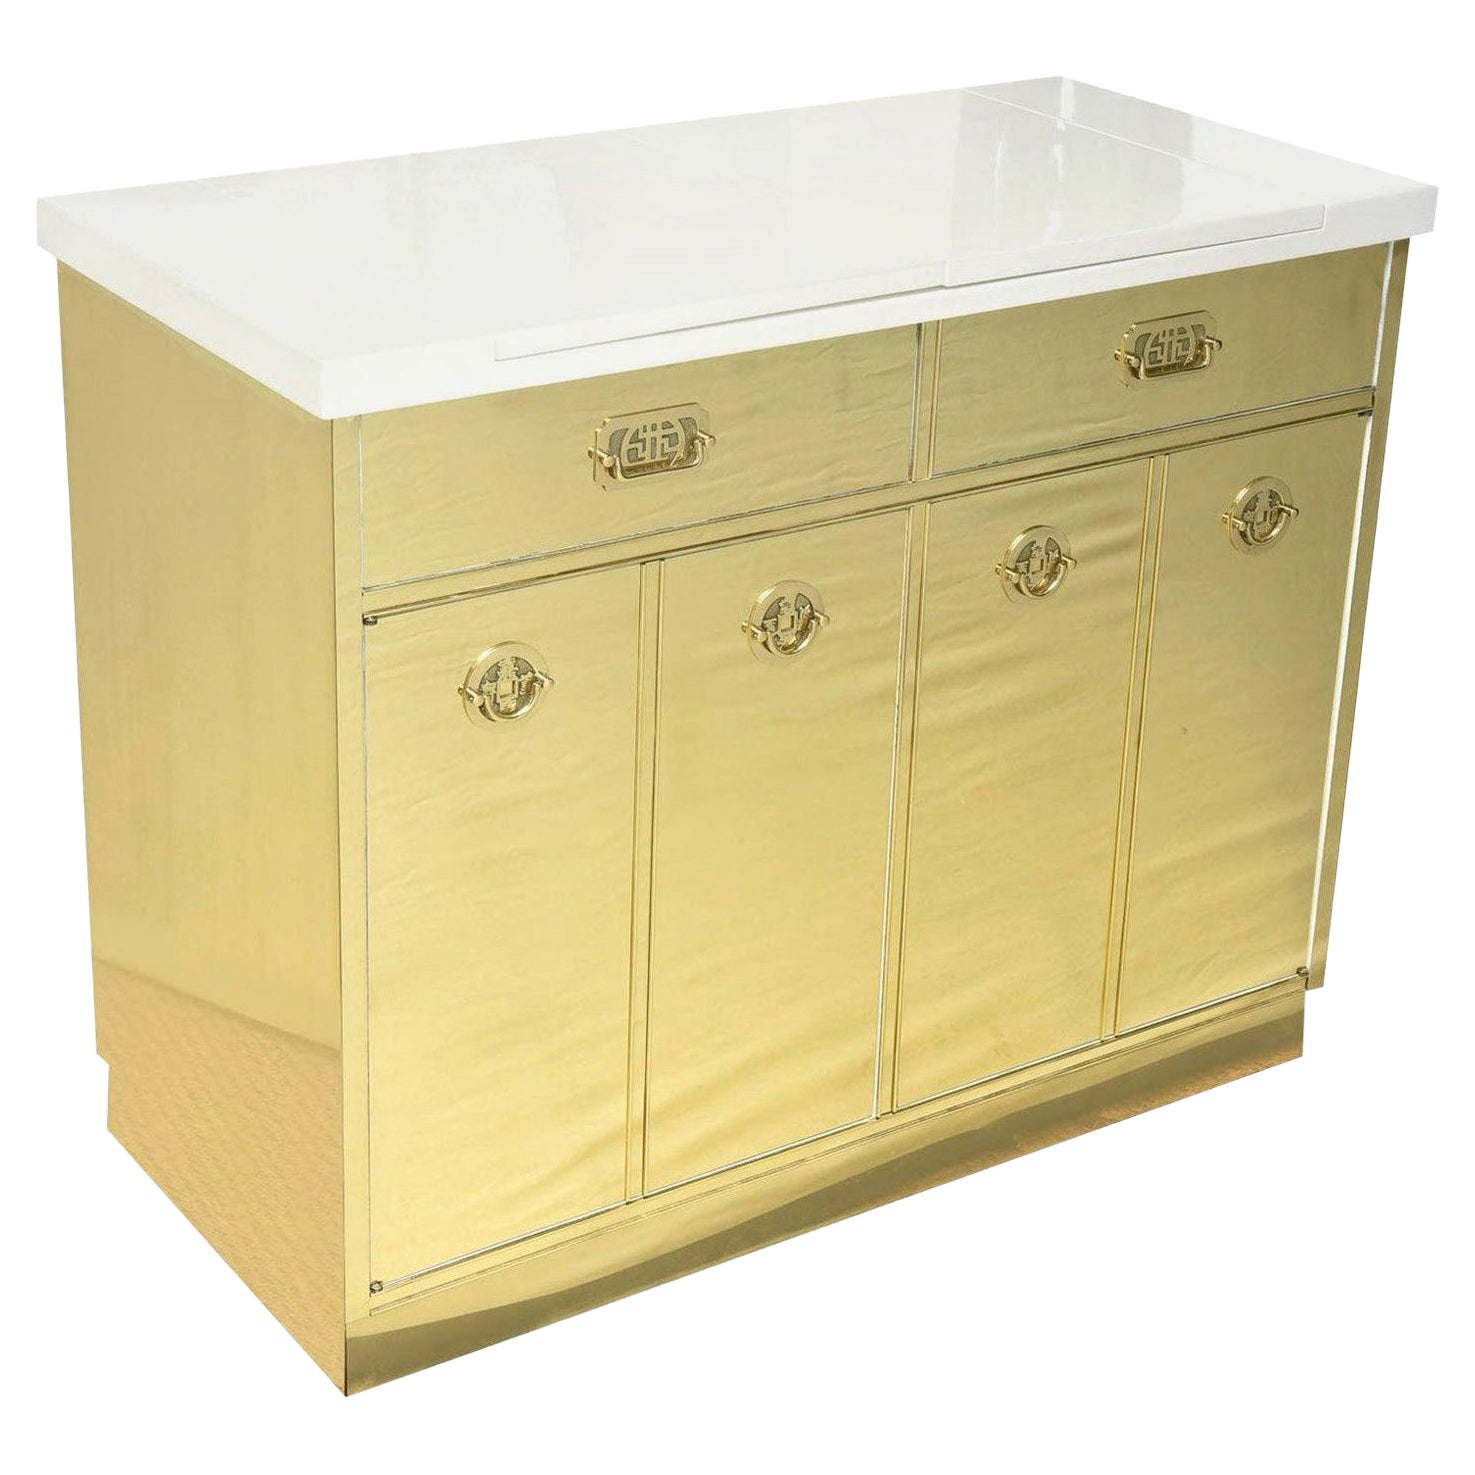 Mastercraft Vintage Restored Brass and White Lacquered Wood Dry Bar or Cabinet